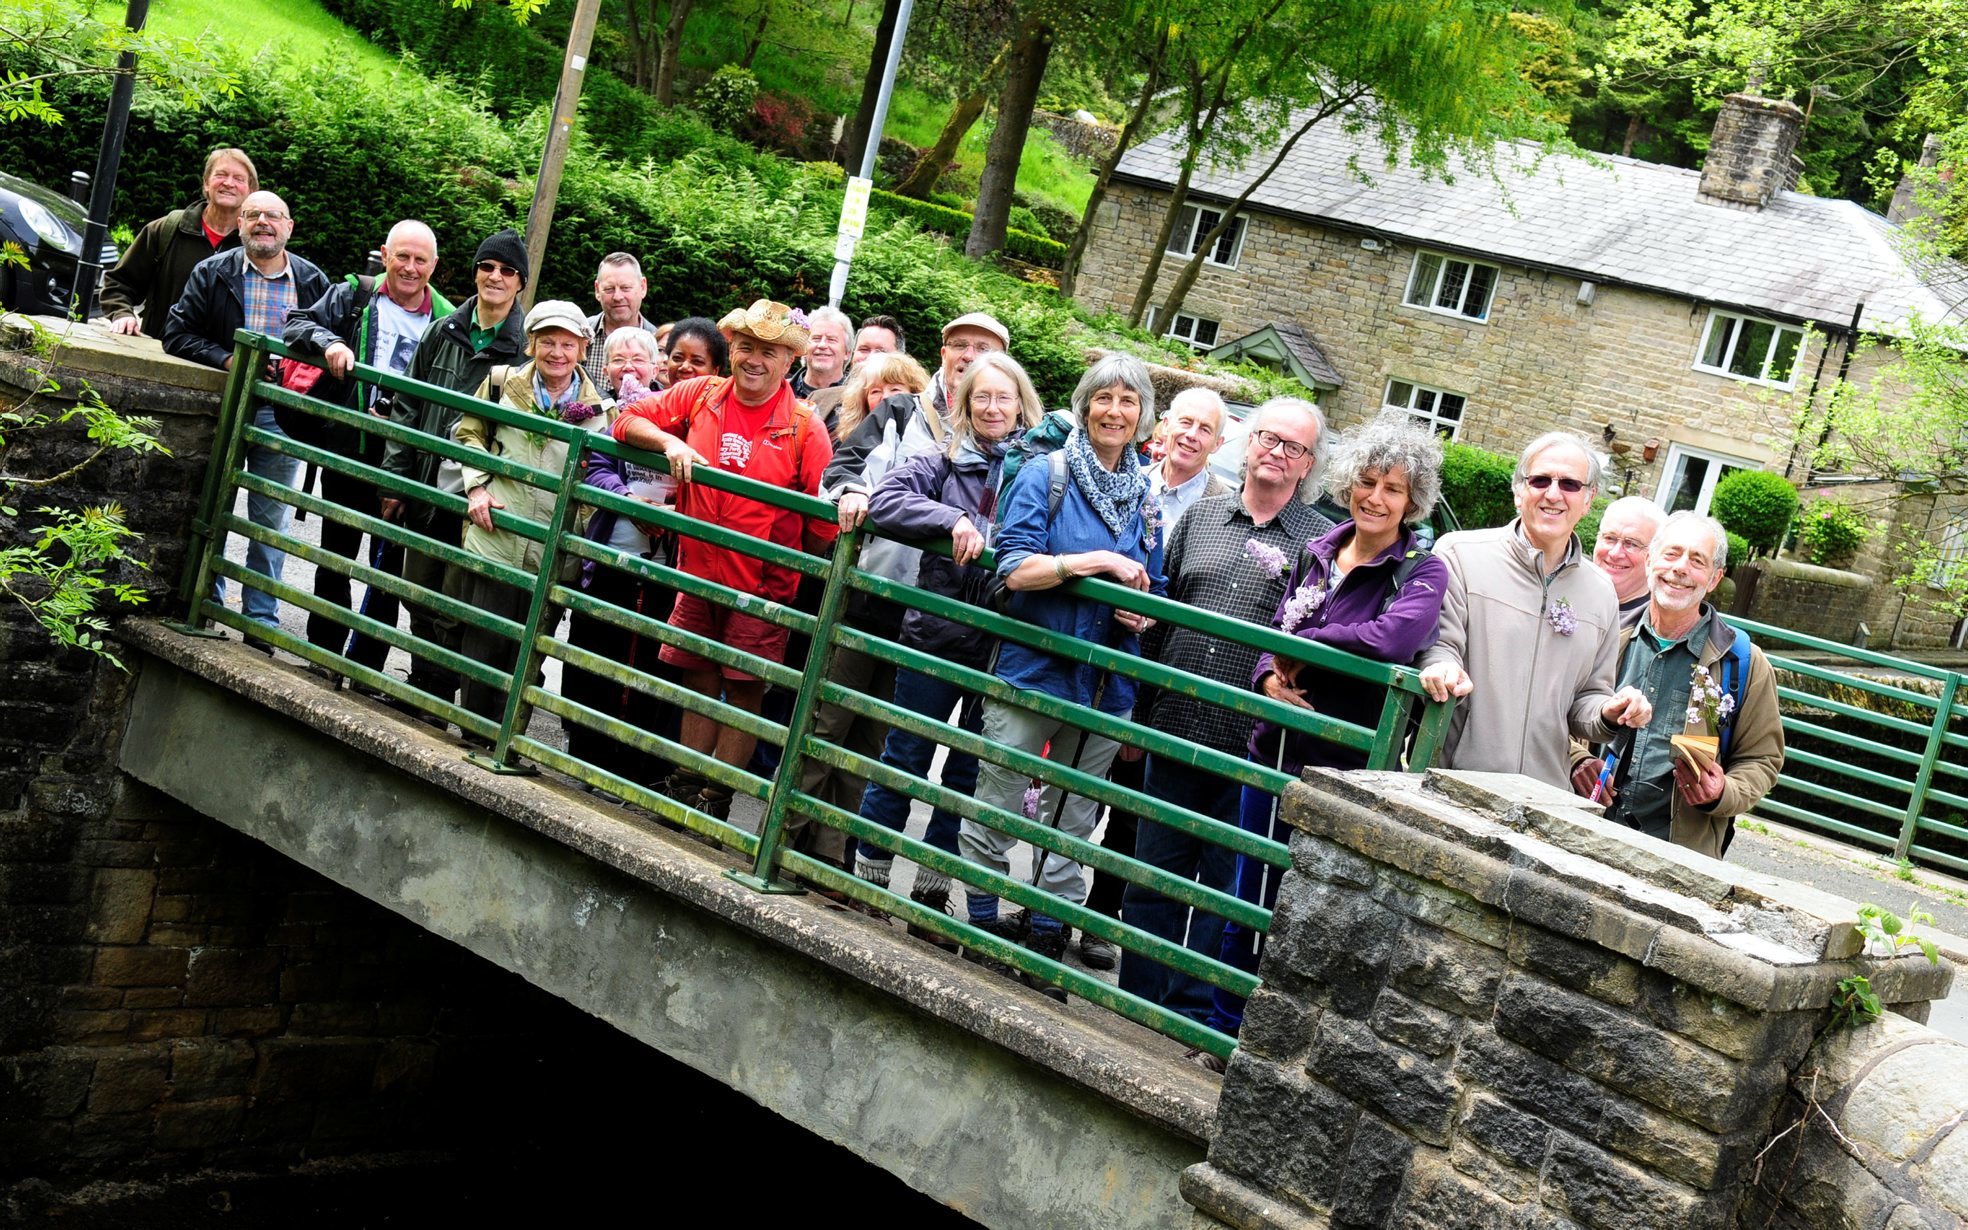 Lovers of author, Walt Whitman, at Barrow Bridge, Bolton, during poetry reading and walk..Images by Steve Holt, Bolton News, Saturday May 30 2015..